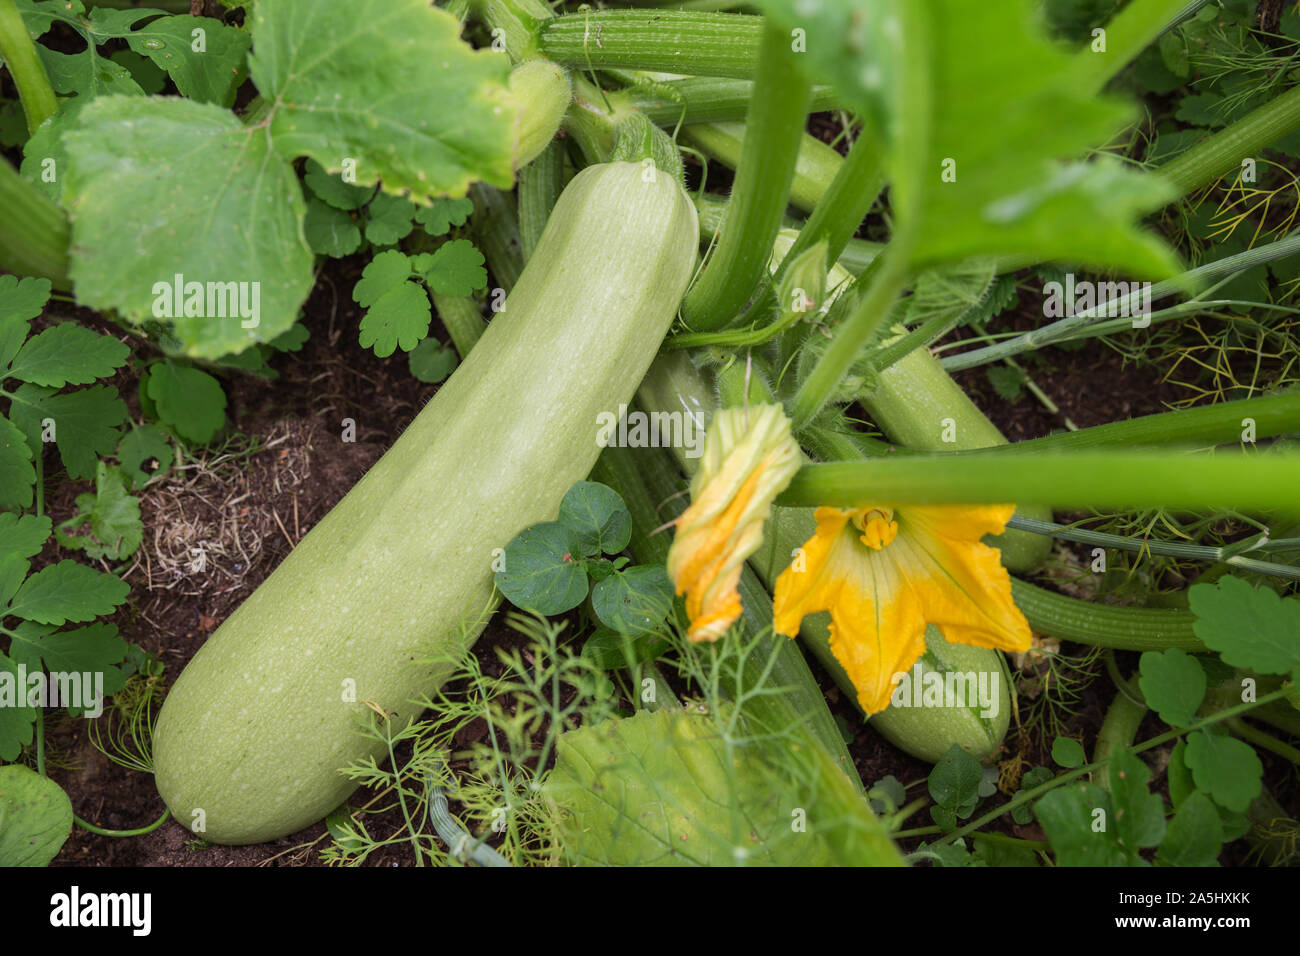 Zucchini or marrow plant with flowers and fruits grows in vegetable garden Stock Photo